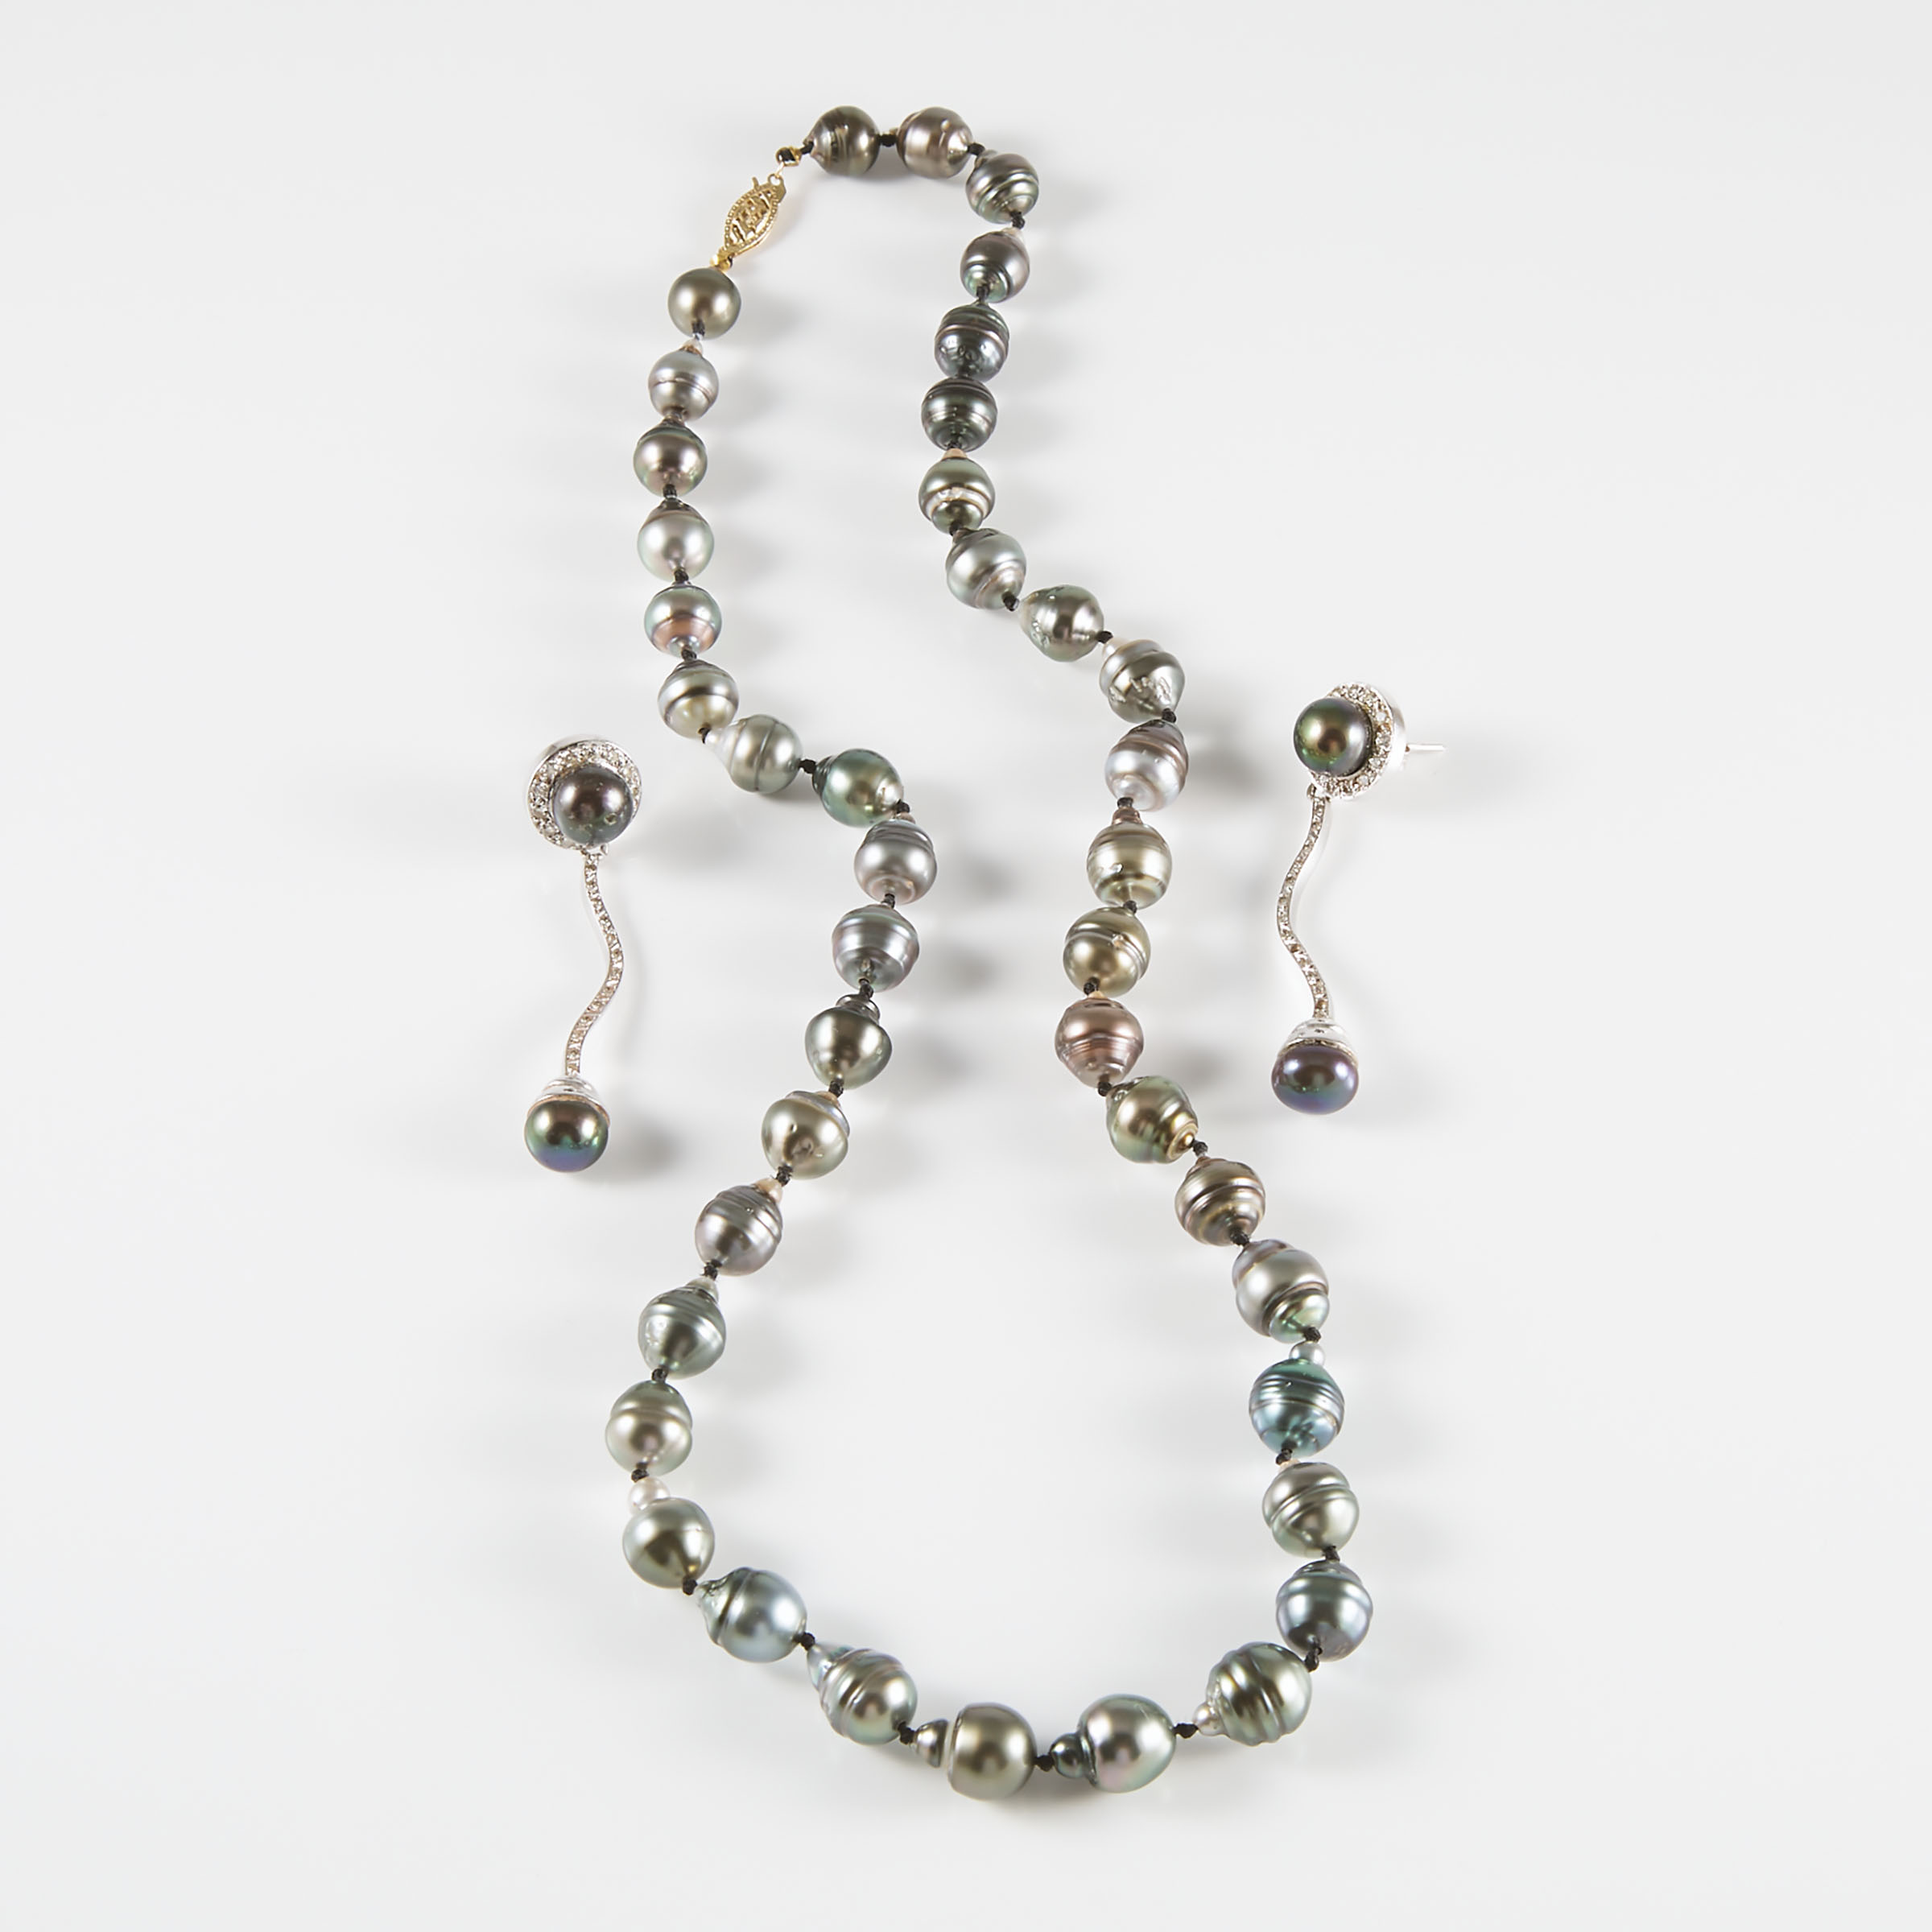 A Pair Of 18k White Gold Drop Earrings And A Single Strand Of Ringed Grey Pearls